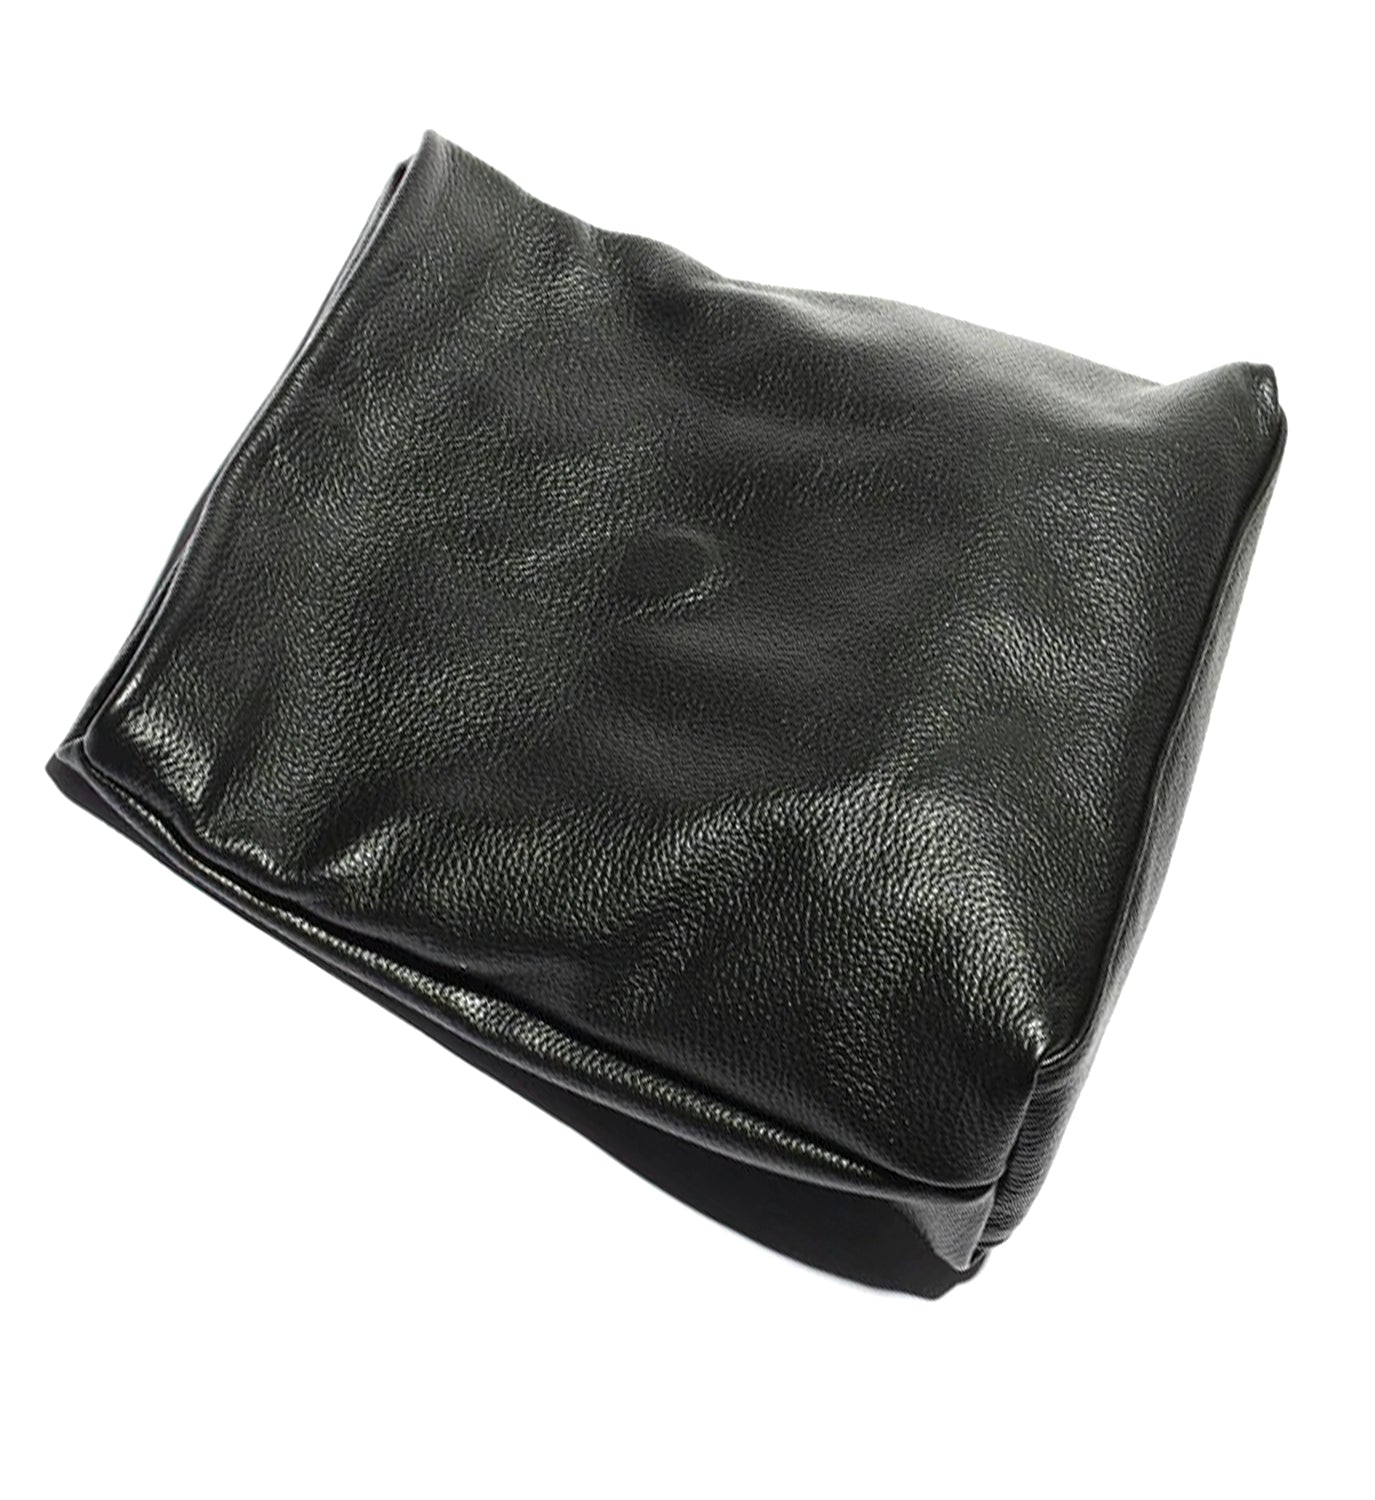 Roll Up Leather Clutch Bag - DIGS